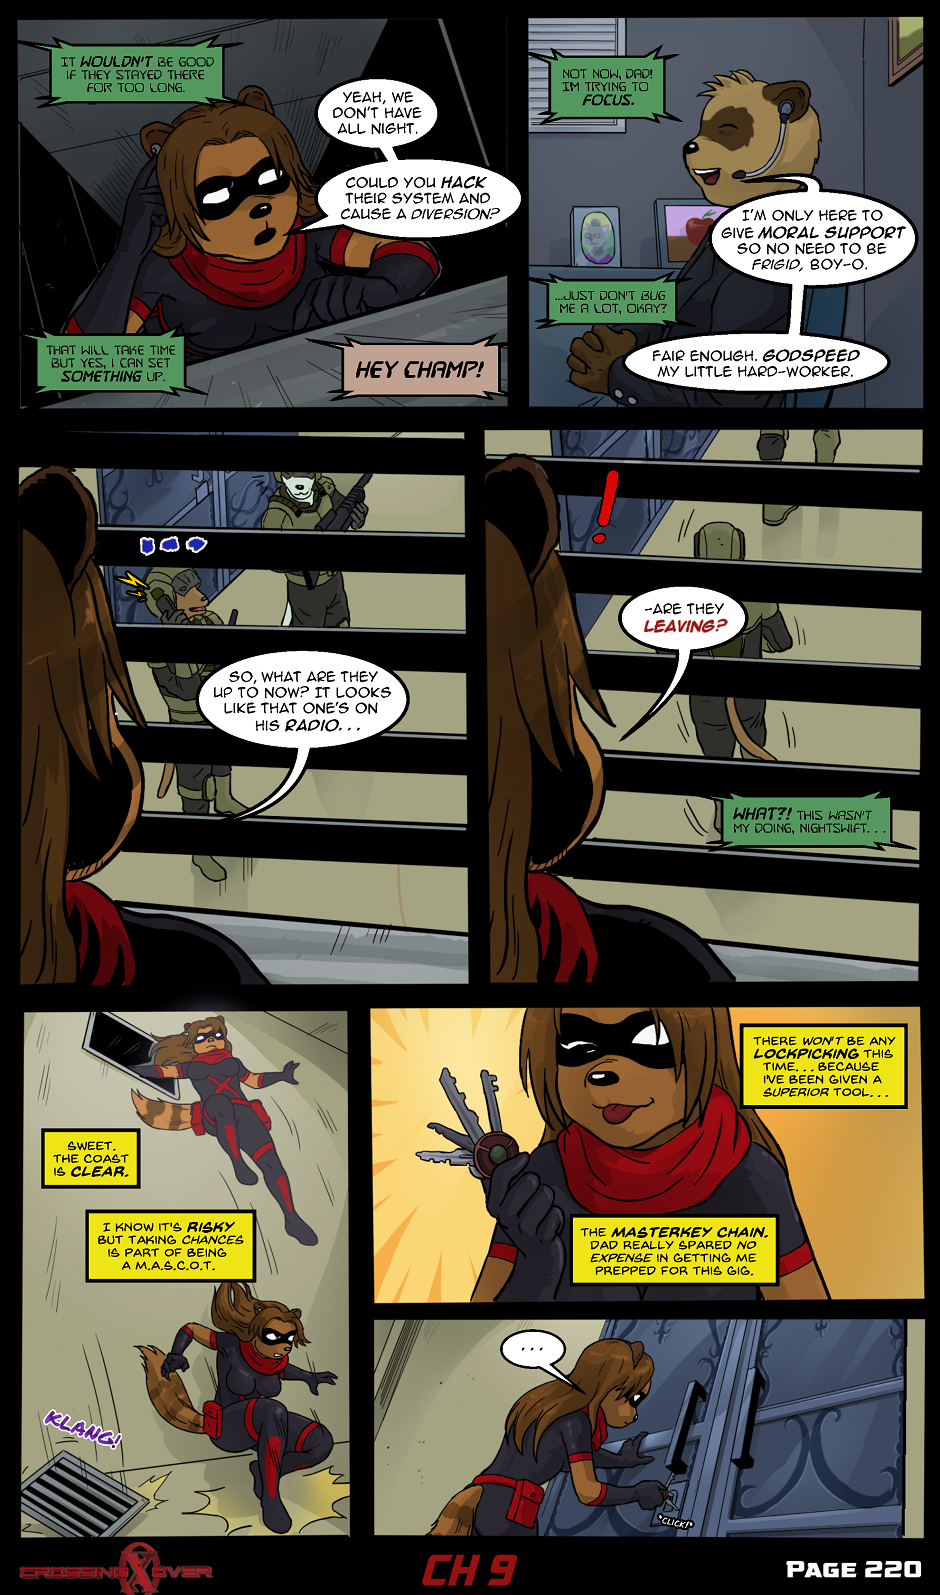 Page 220 (Ch 9)